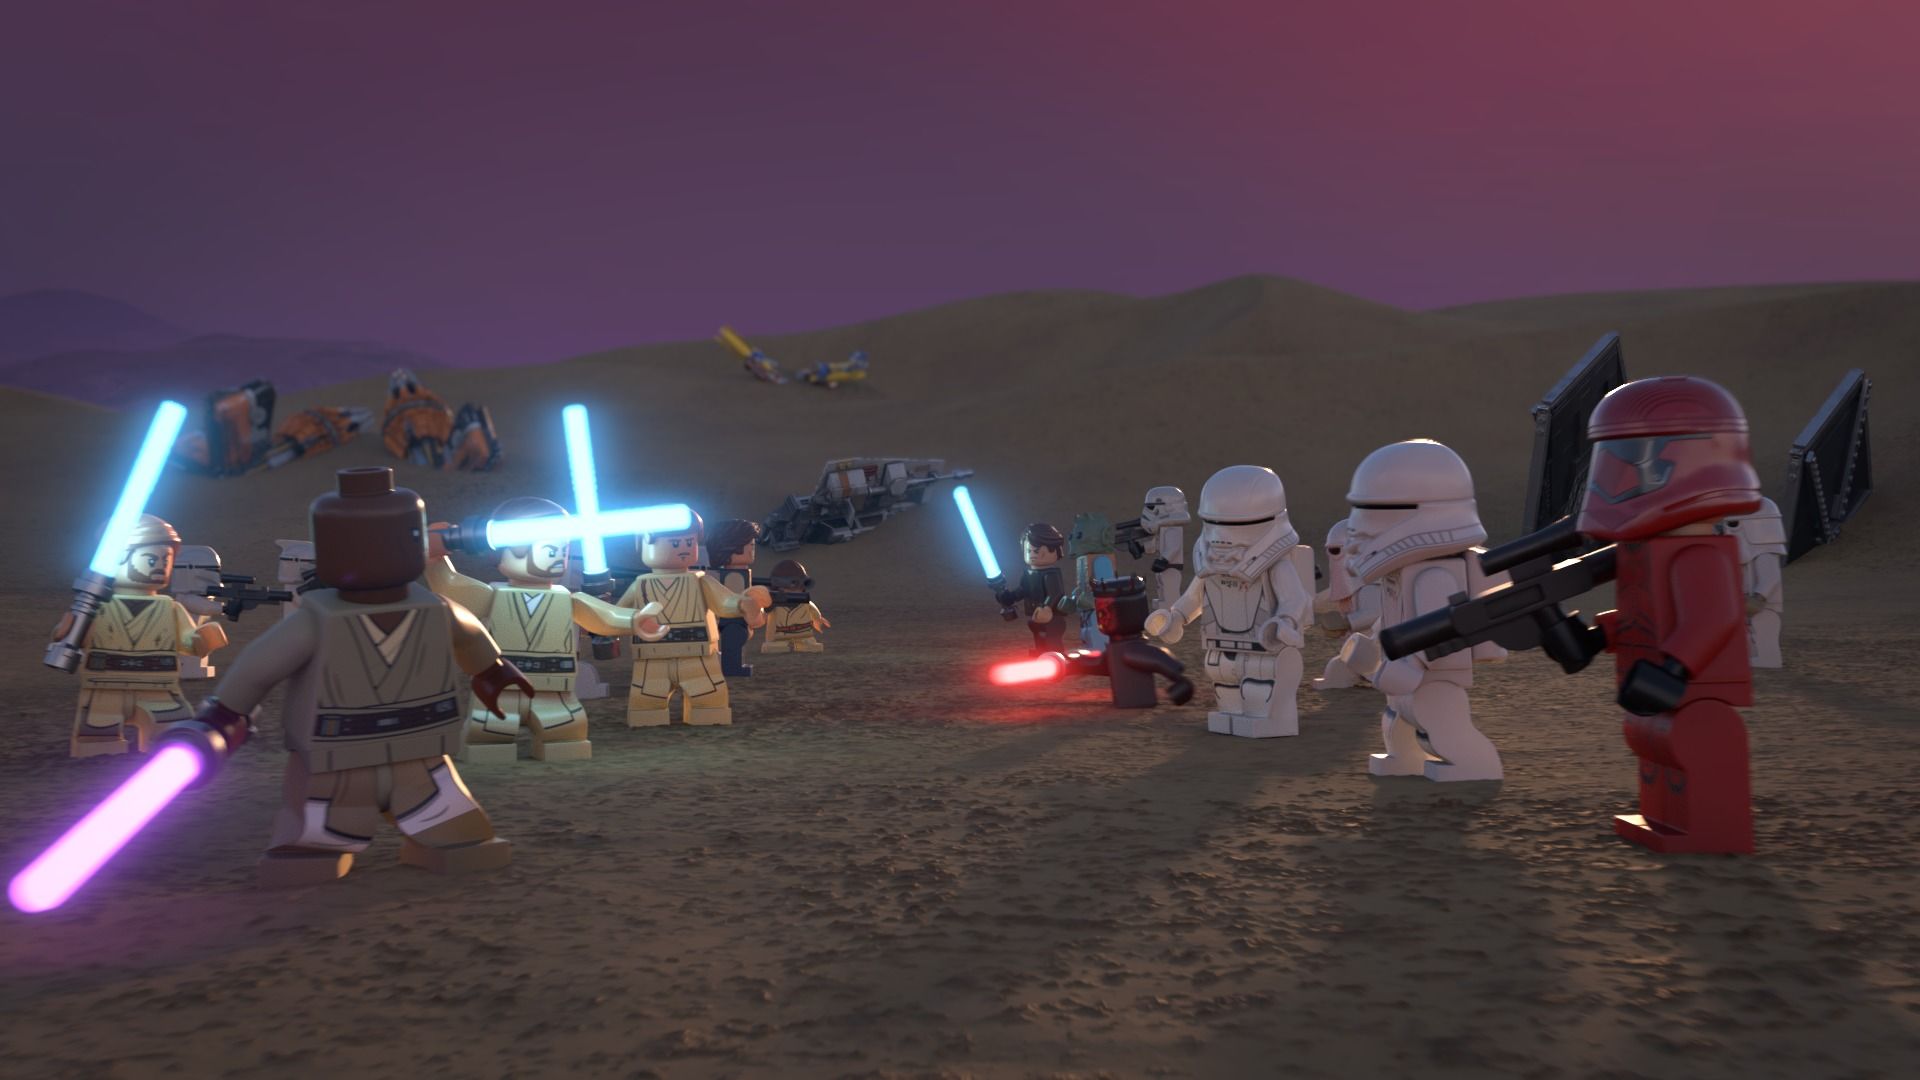 lego-star-wars-holiday-special-stormtroopers